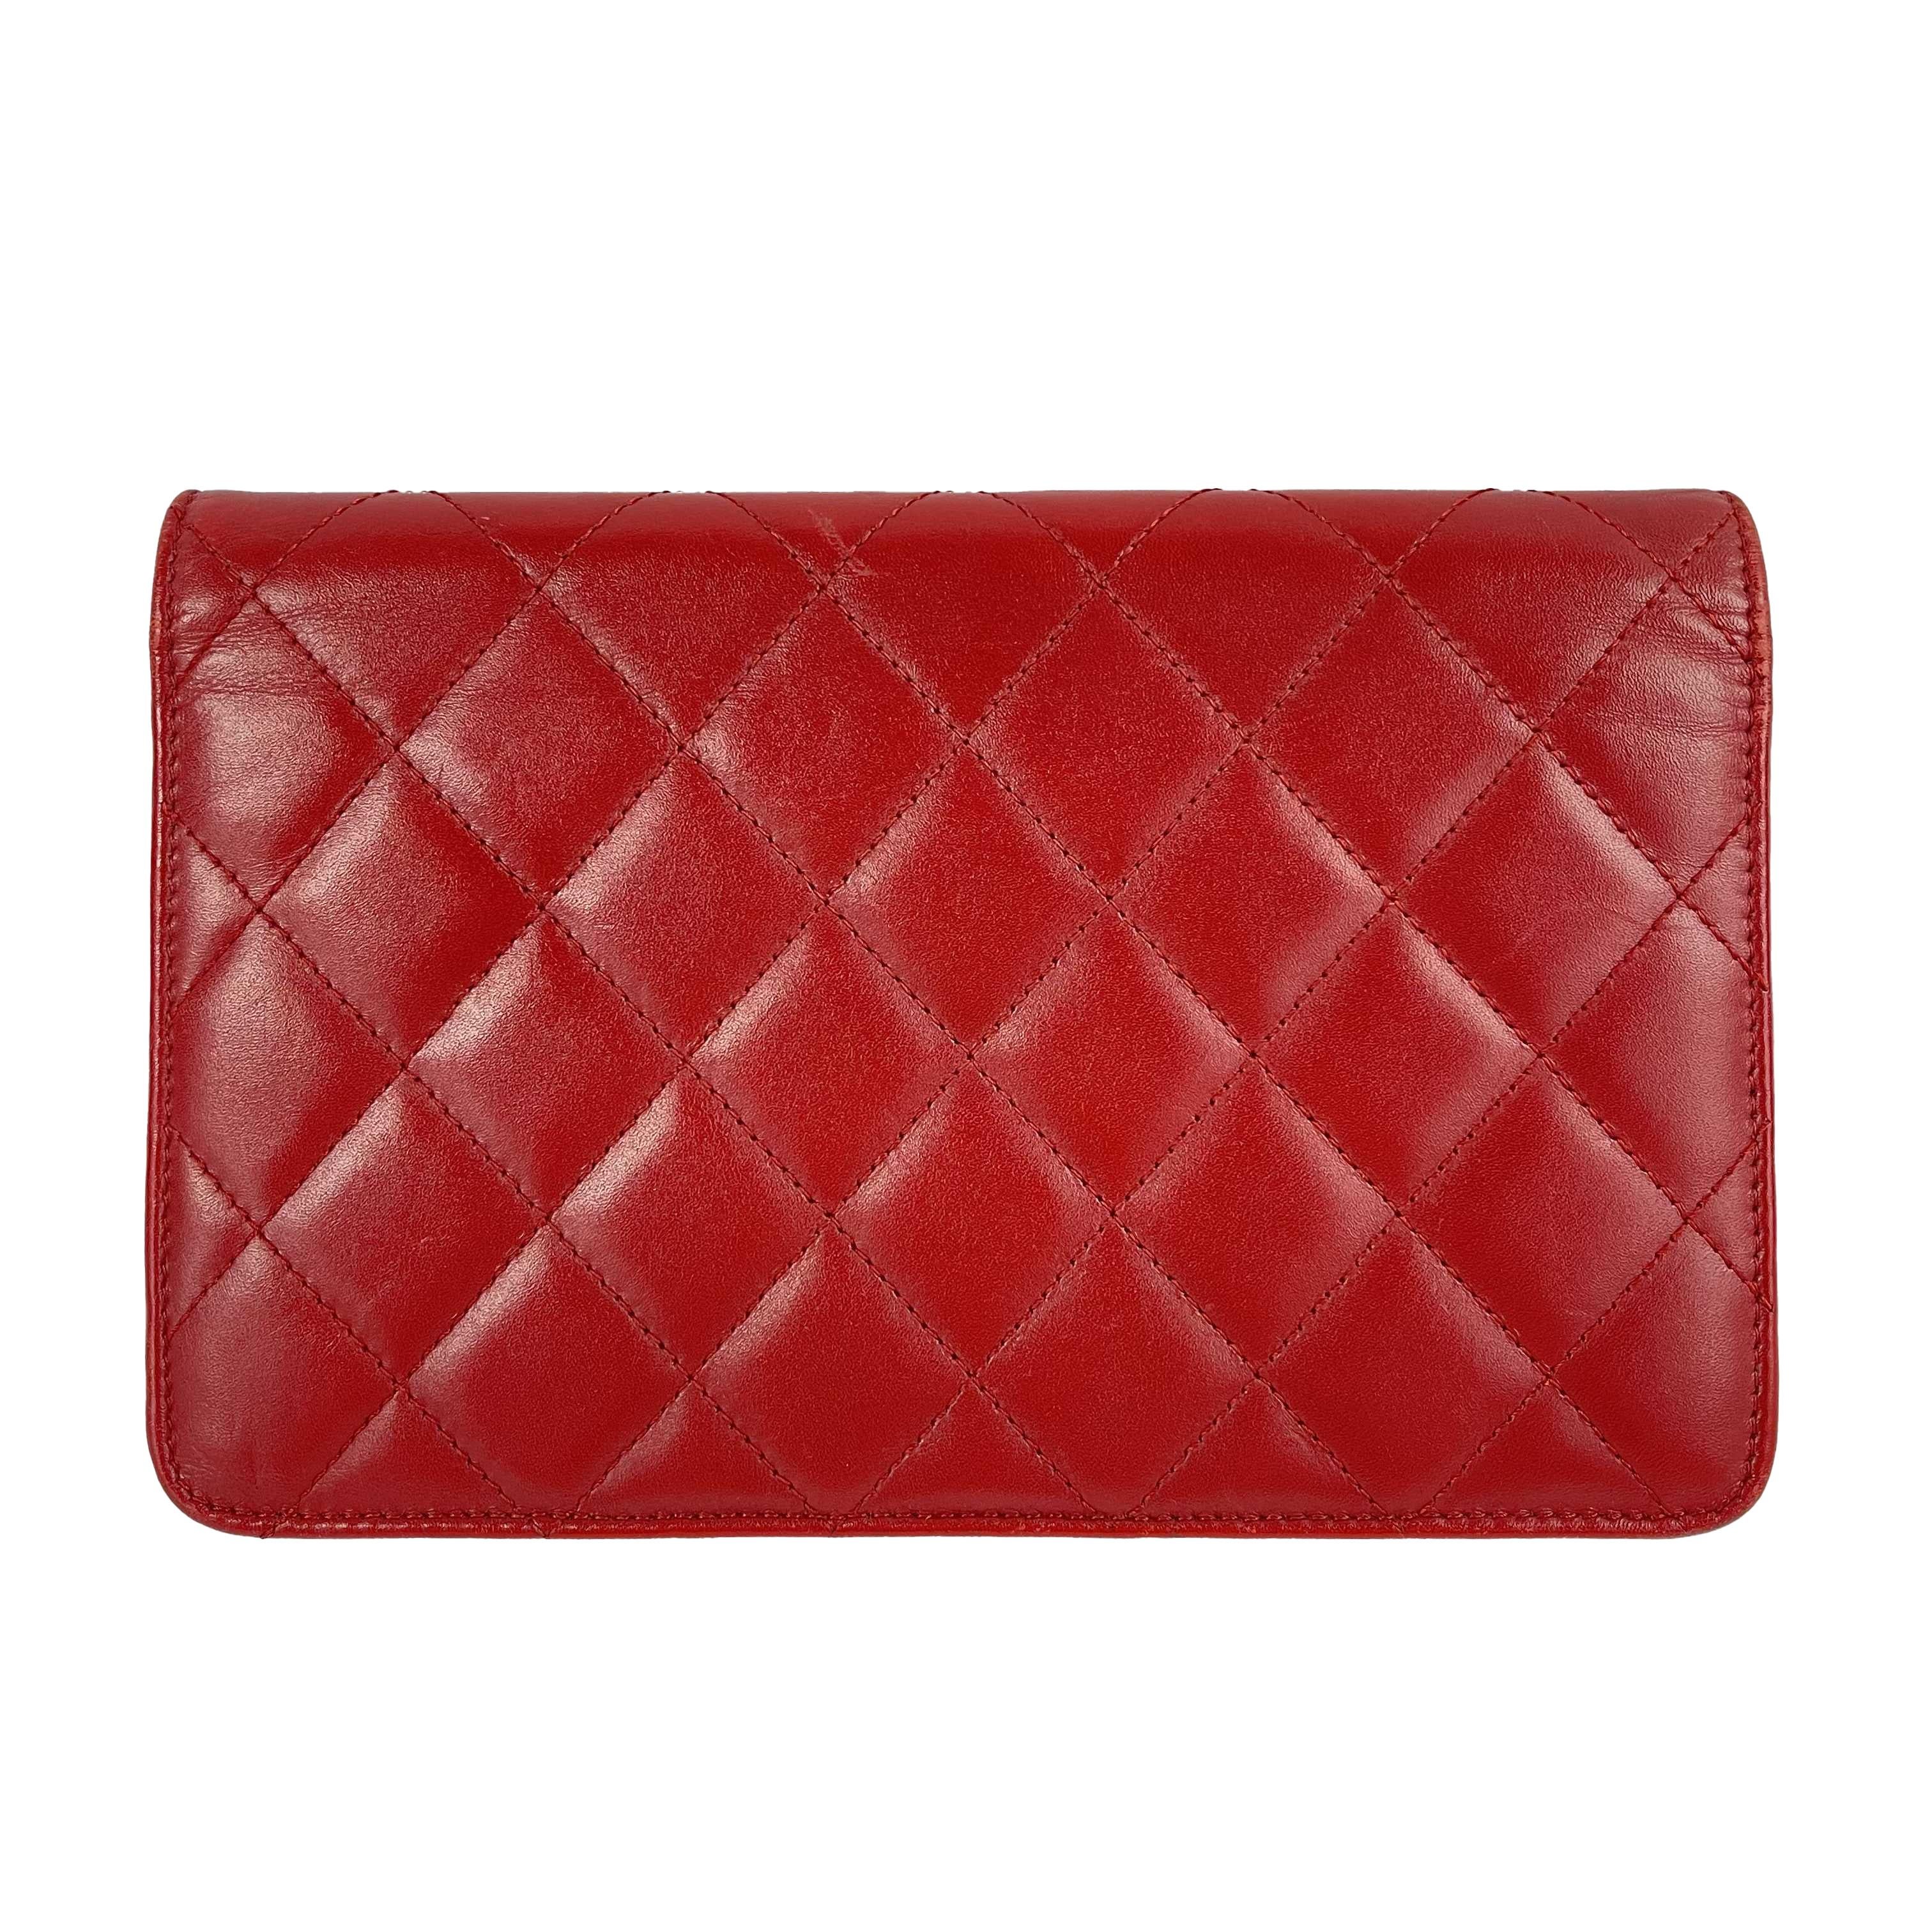 CHANEL - Calfskin Quilted Cambon Red / Silver Wallet On Chain - Crossbody

Description

From the 2010 Collection.
This wallet on chain is beautifully crafted of smooth red leather with a red patent leather Chanel CC logo patch. The wallet opens with